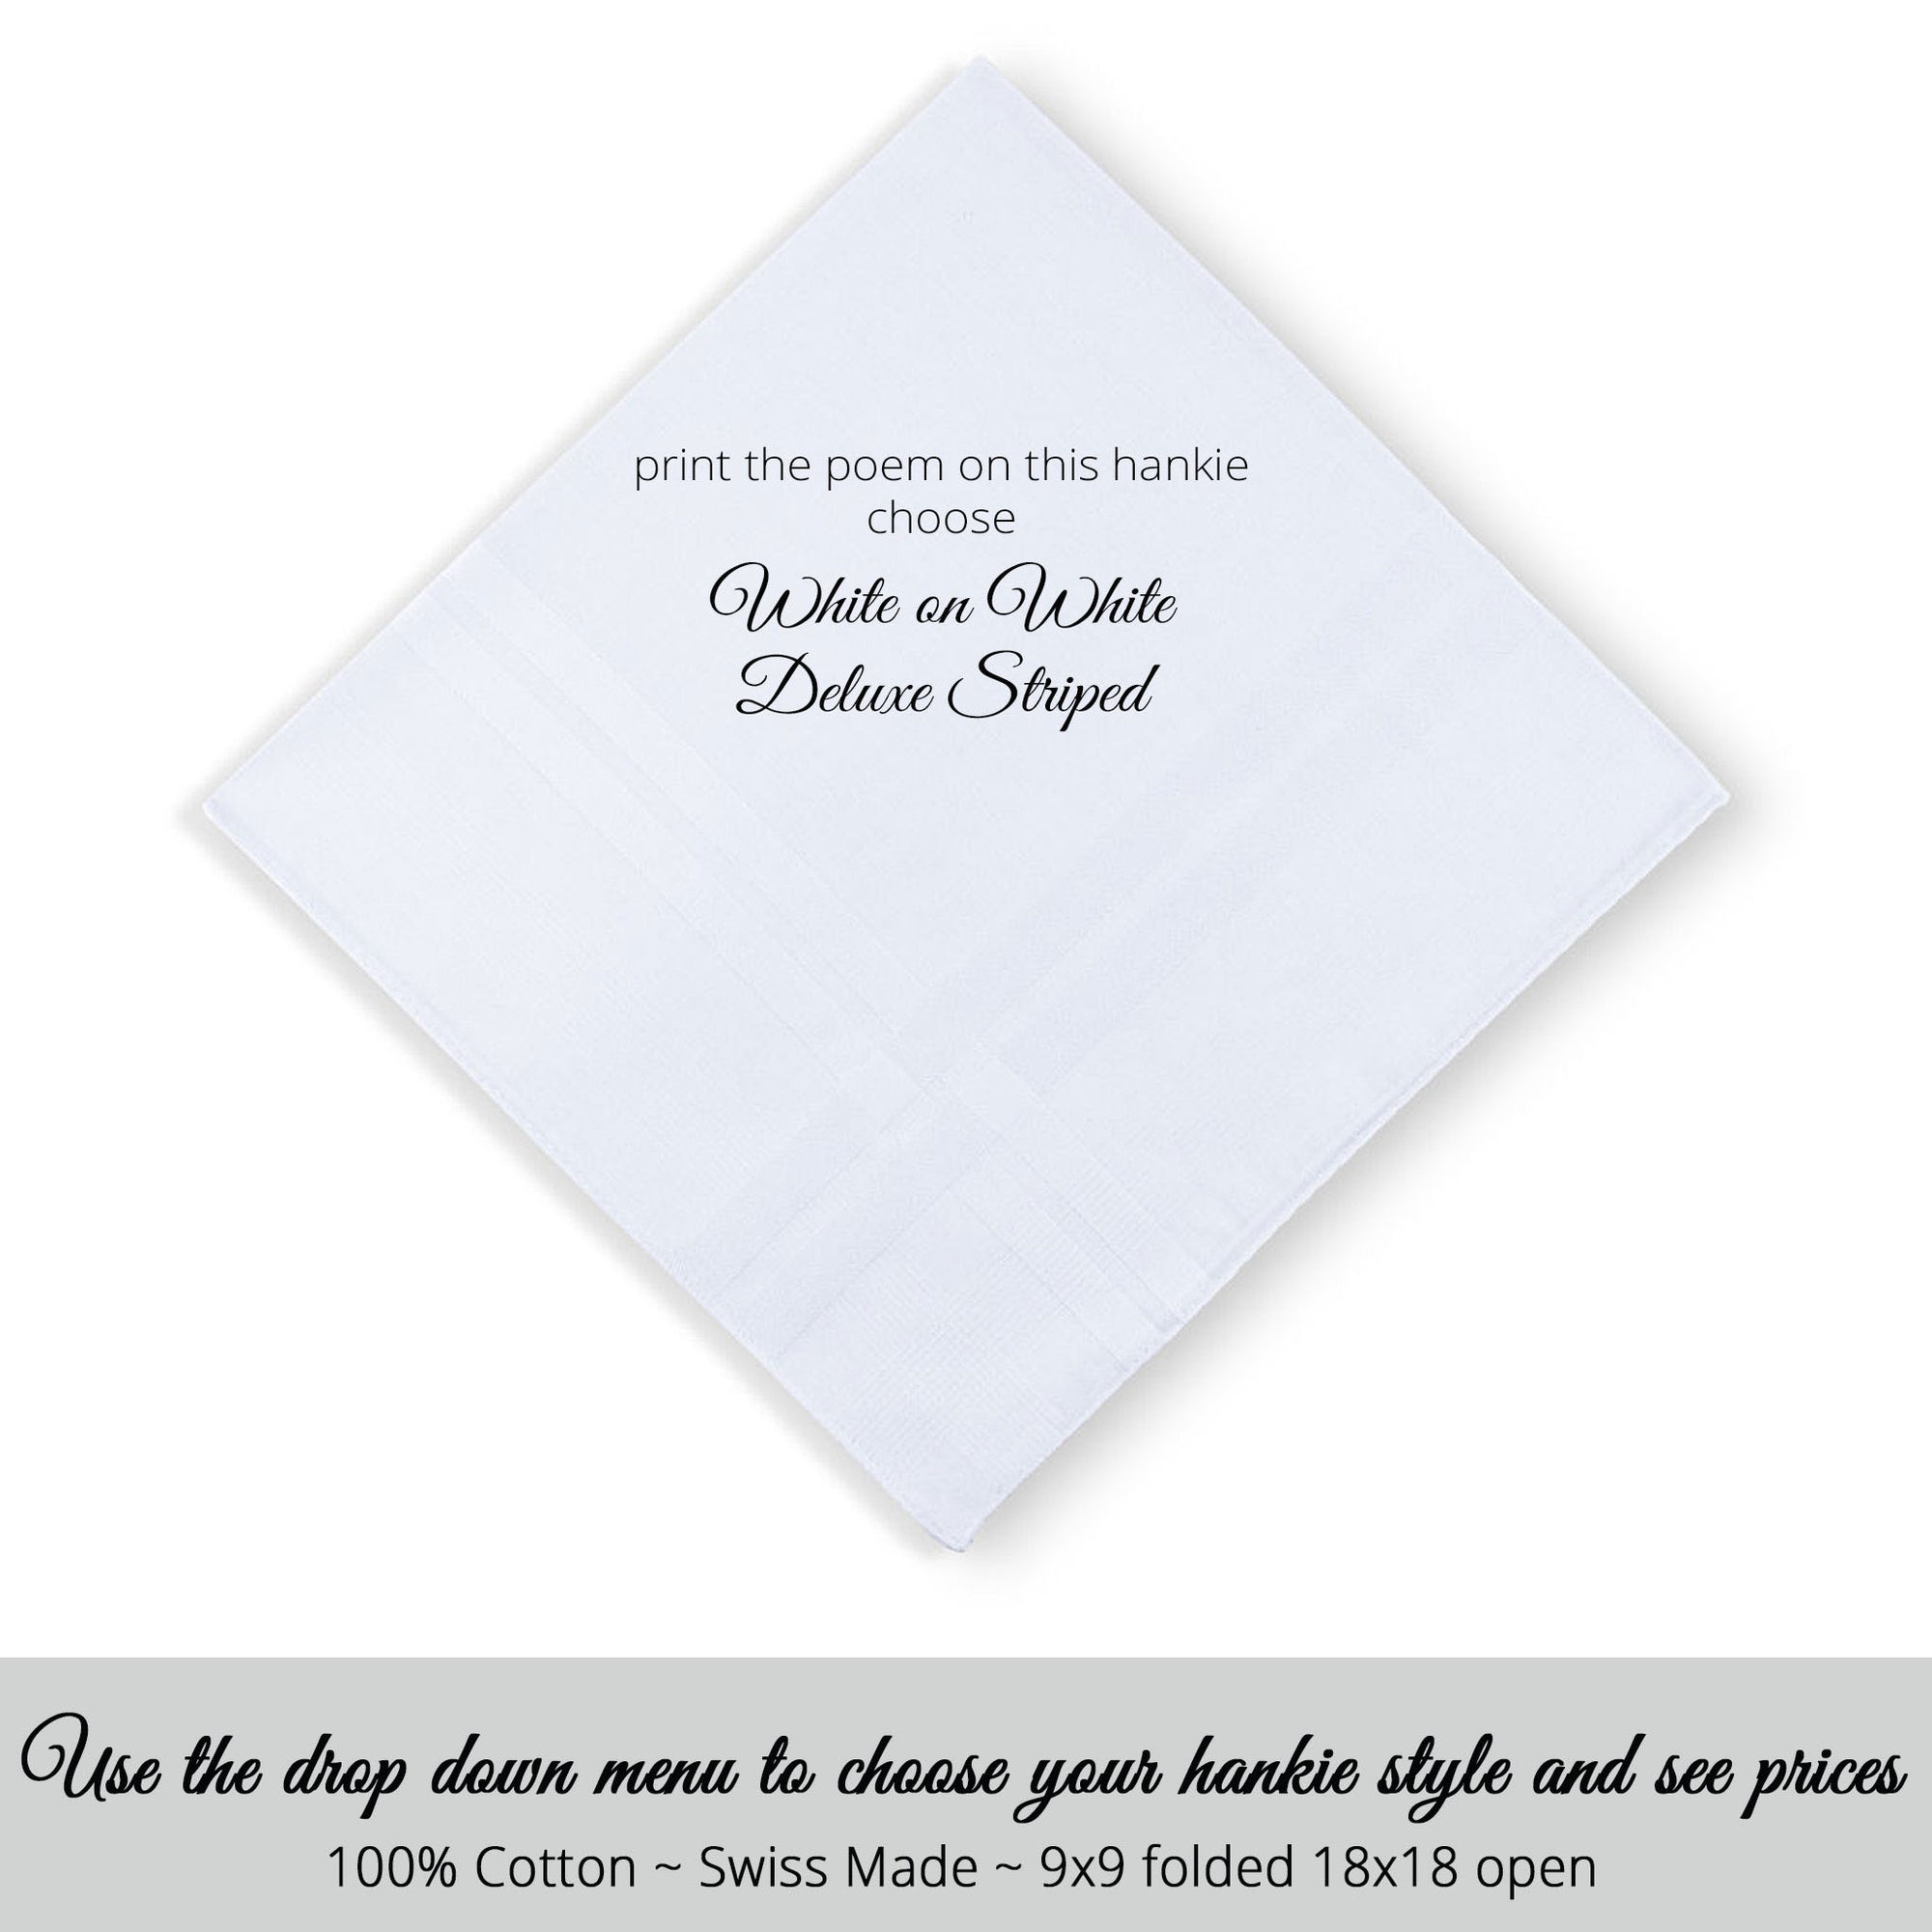 Wedding Swiss made masculine handkerchief white on white deluxe striped father of the bride gift